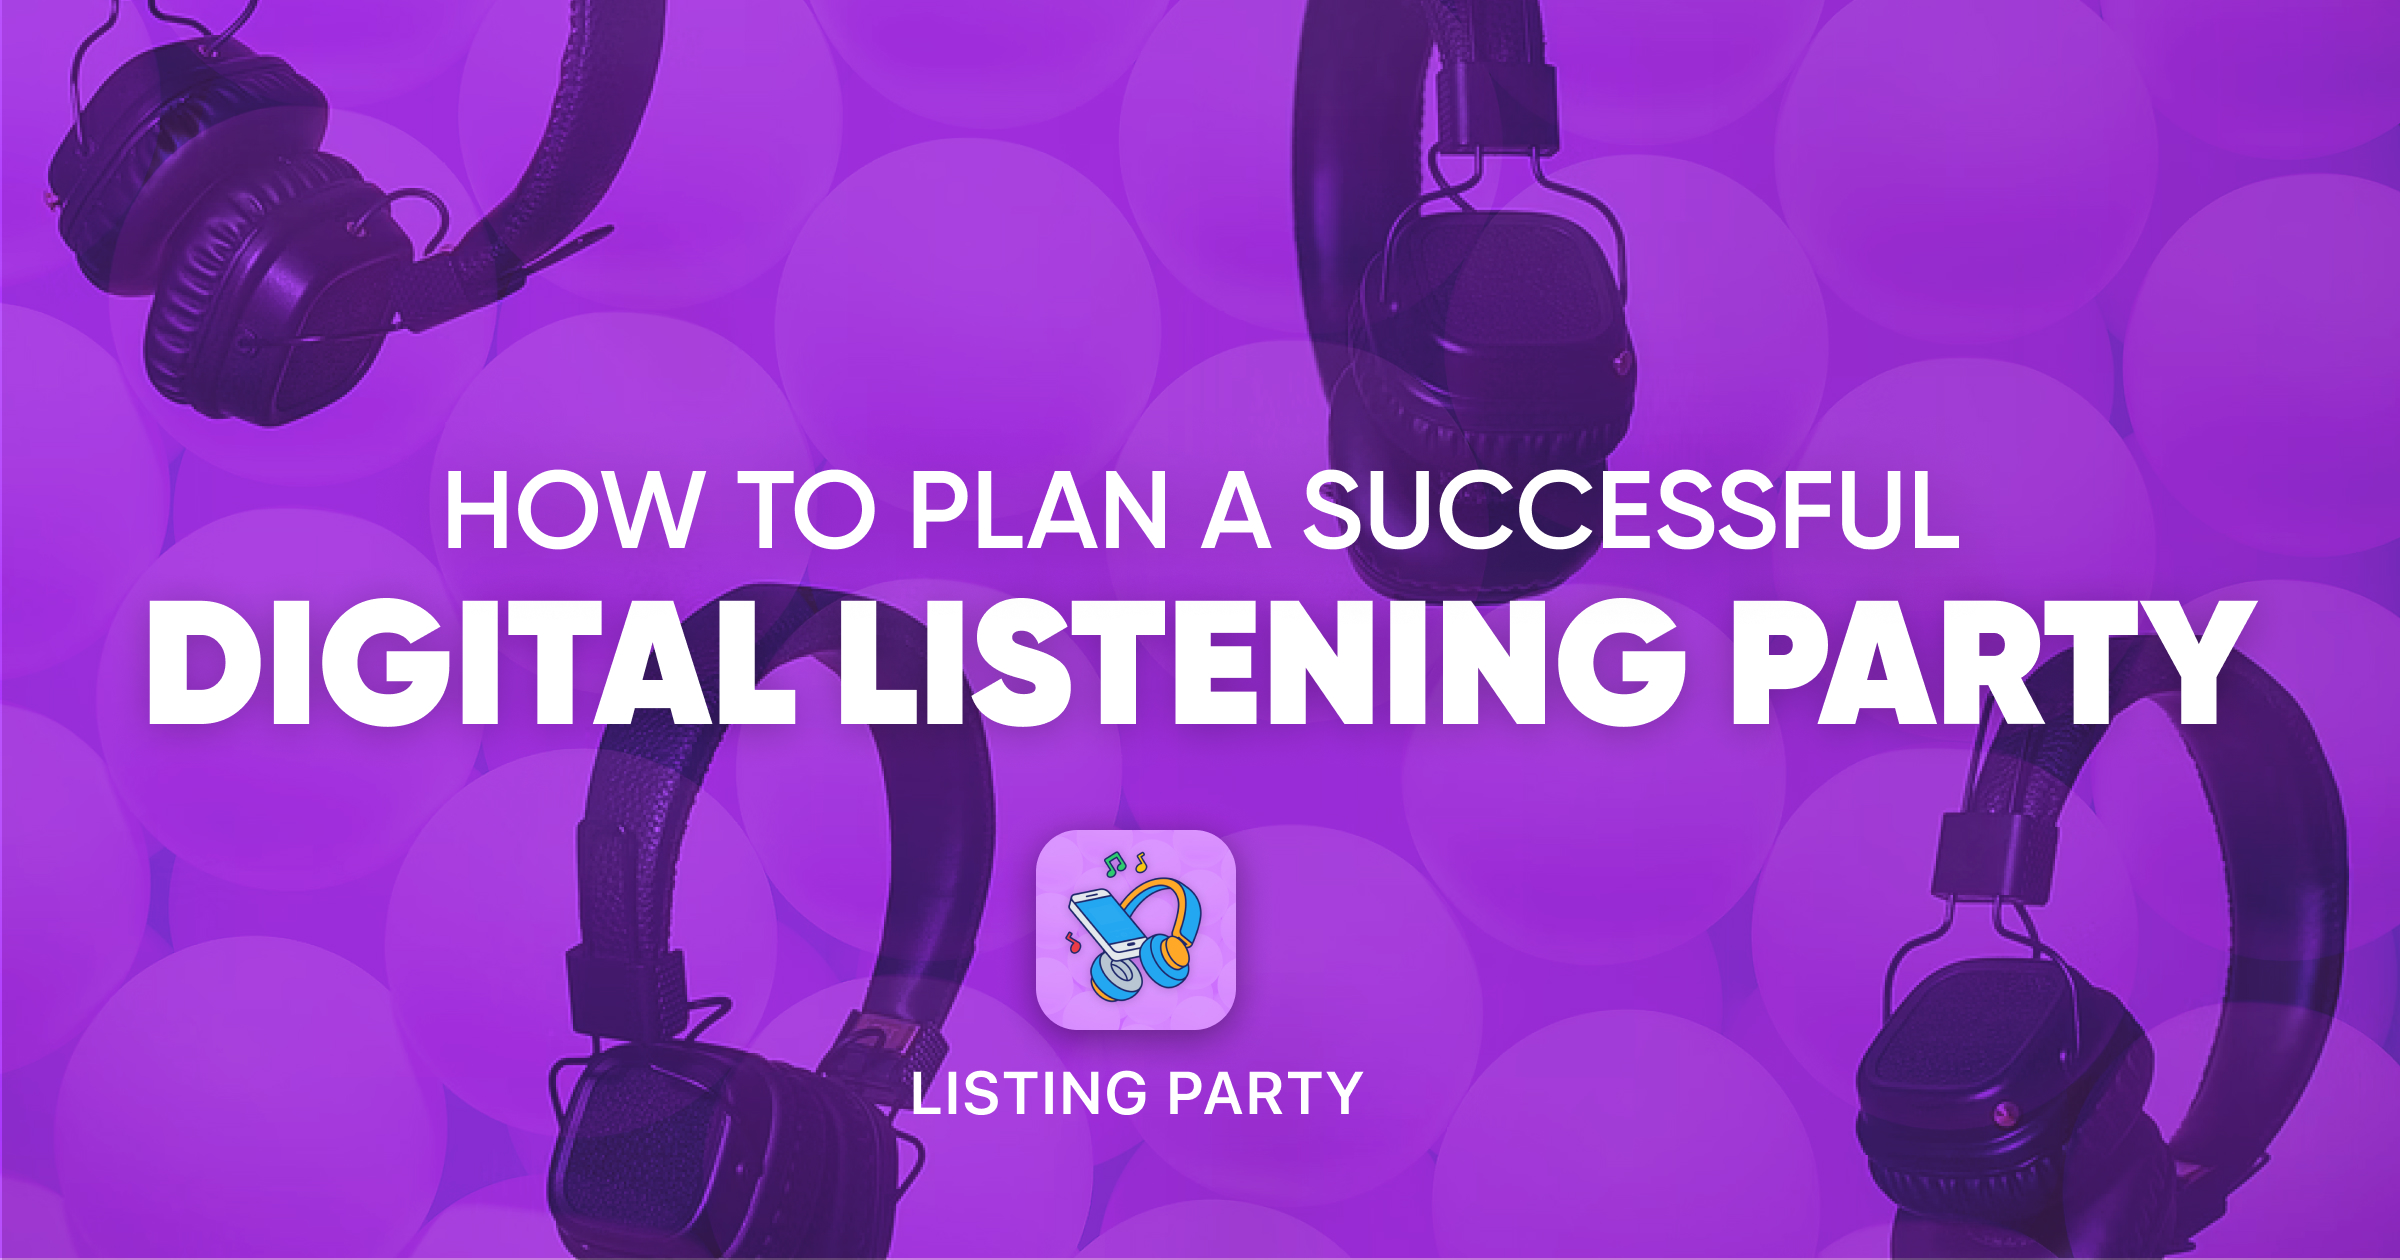 Listening Party For Musicians: How To Plan A Successful Digital